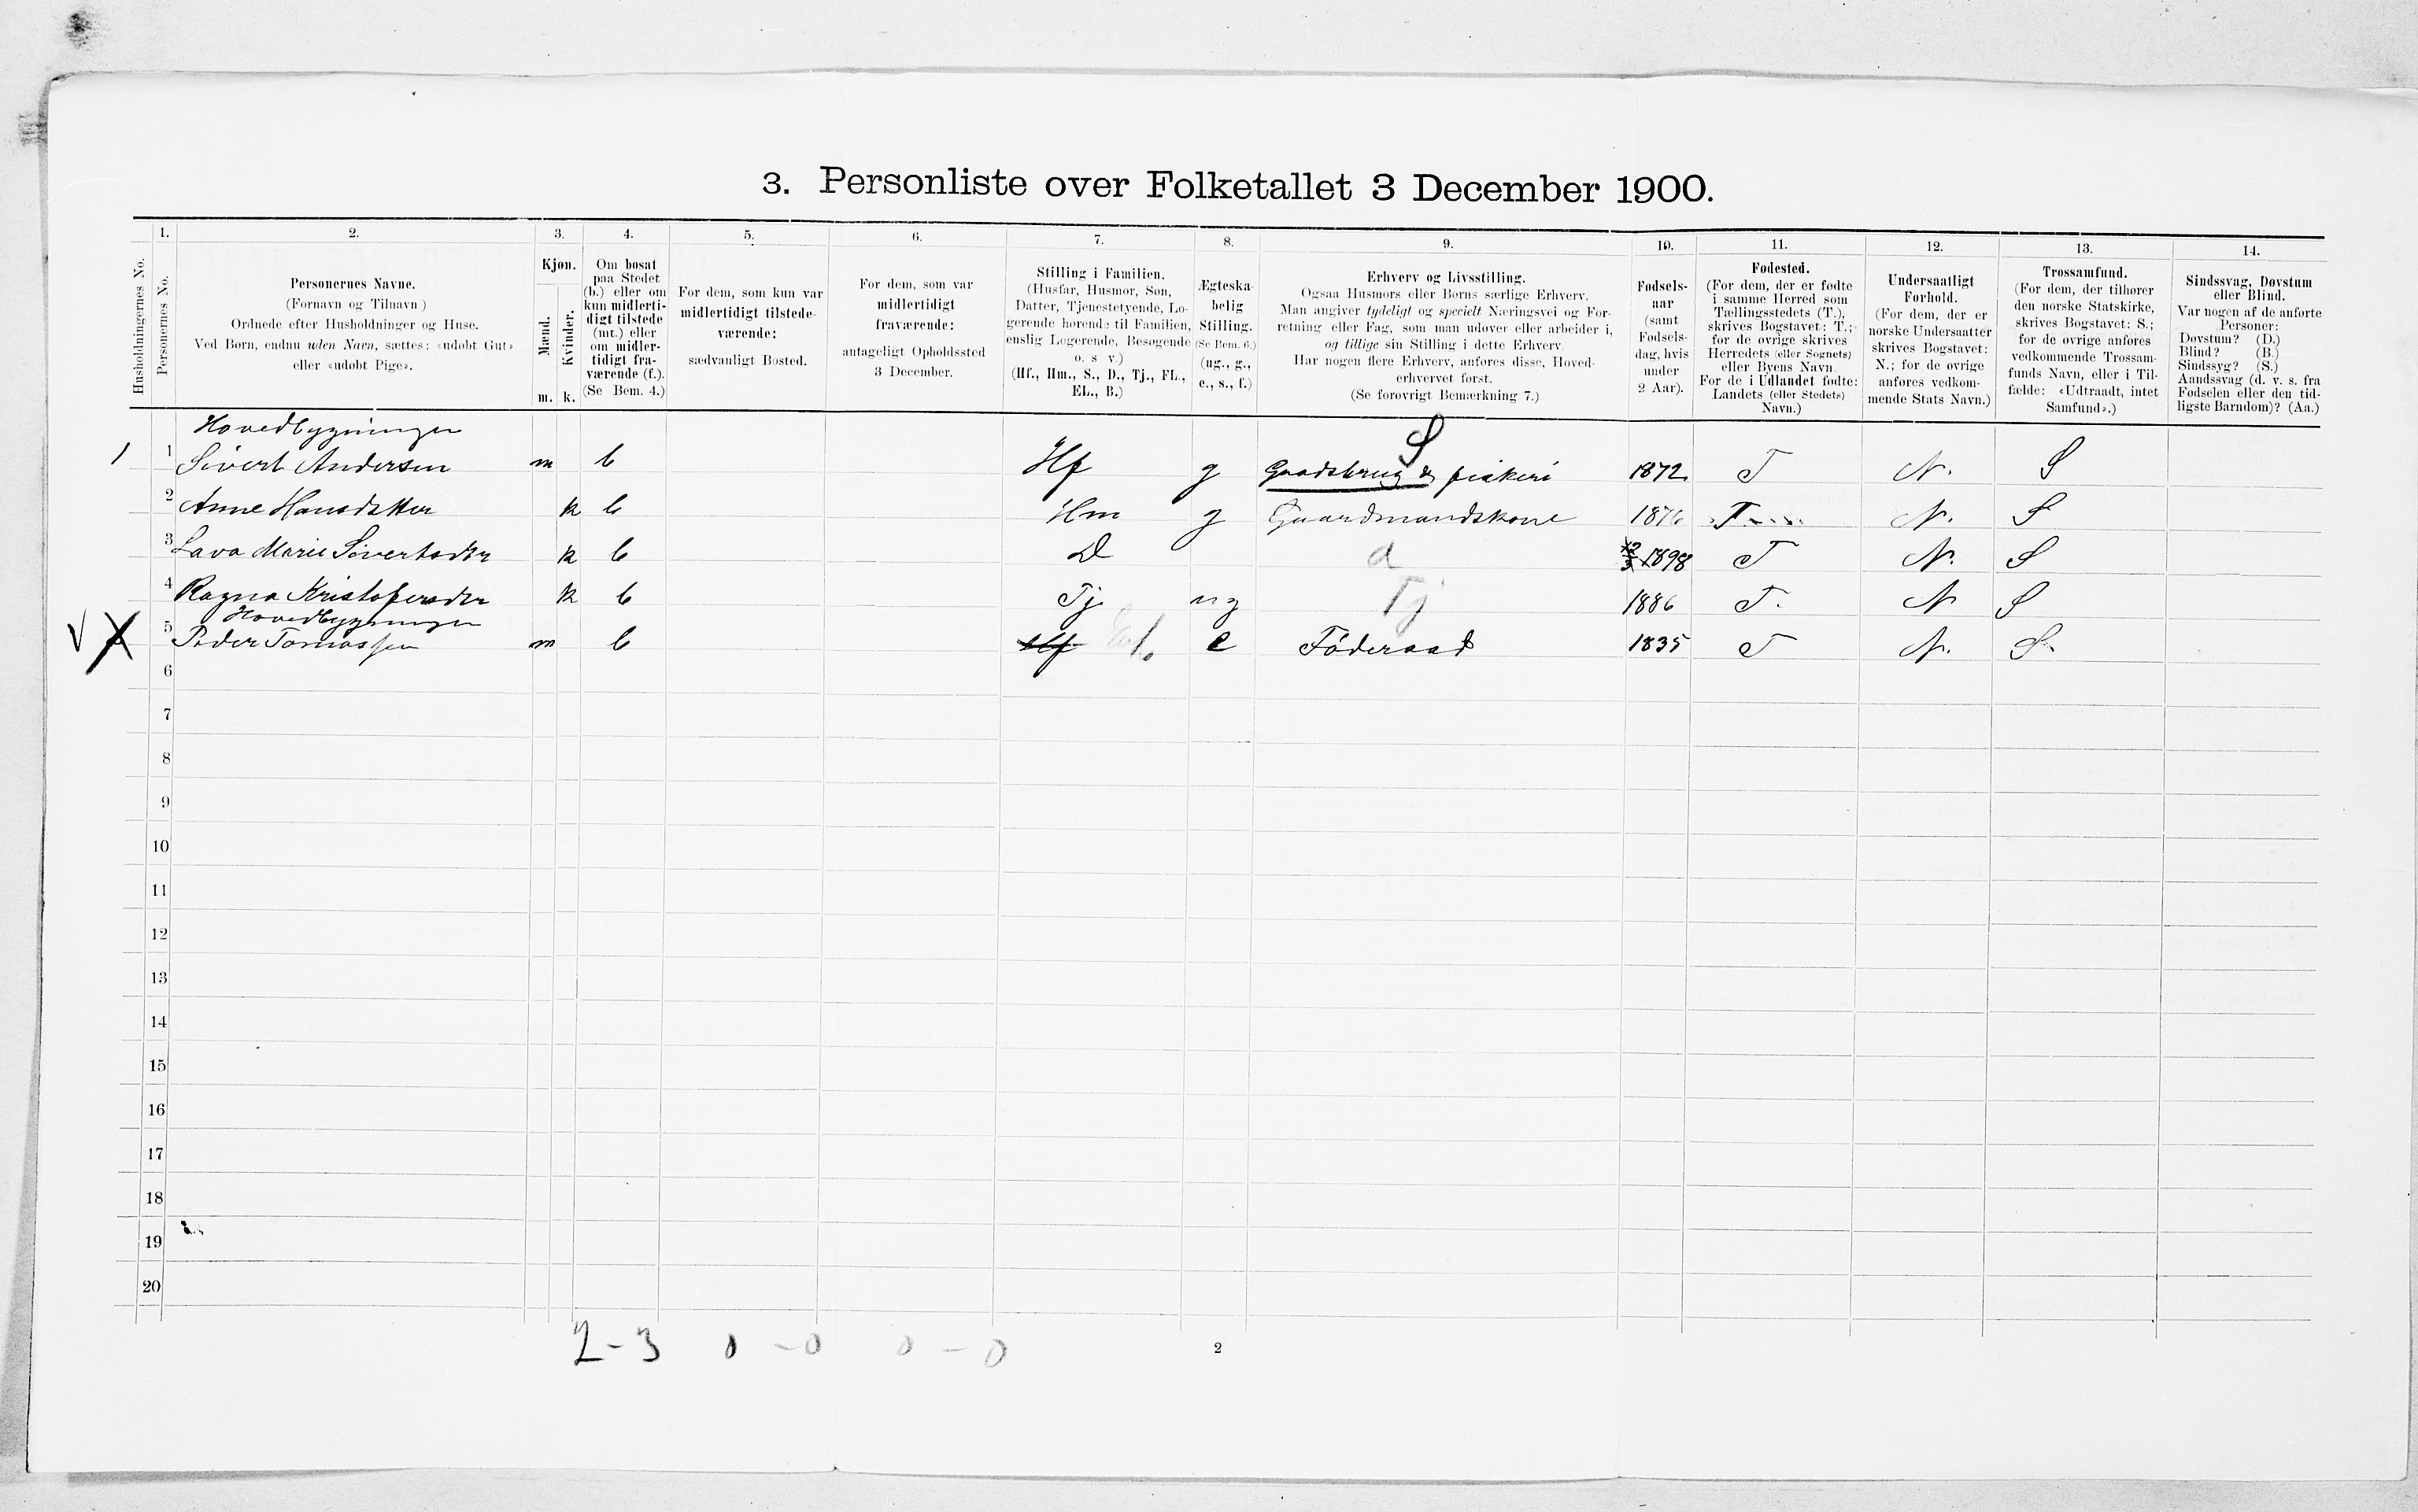 SAT, 1900 census for Bud, 1900, p. 905